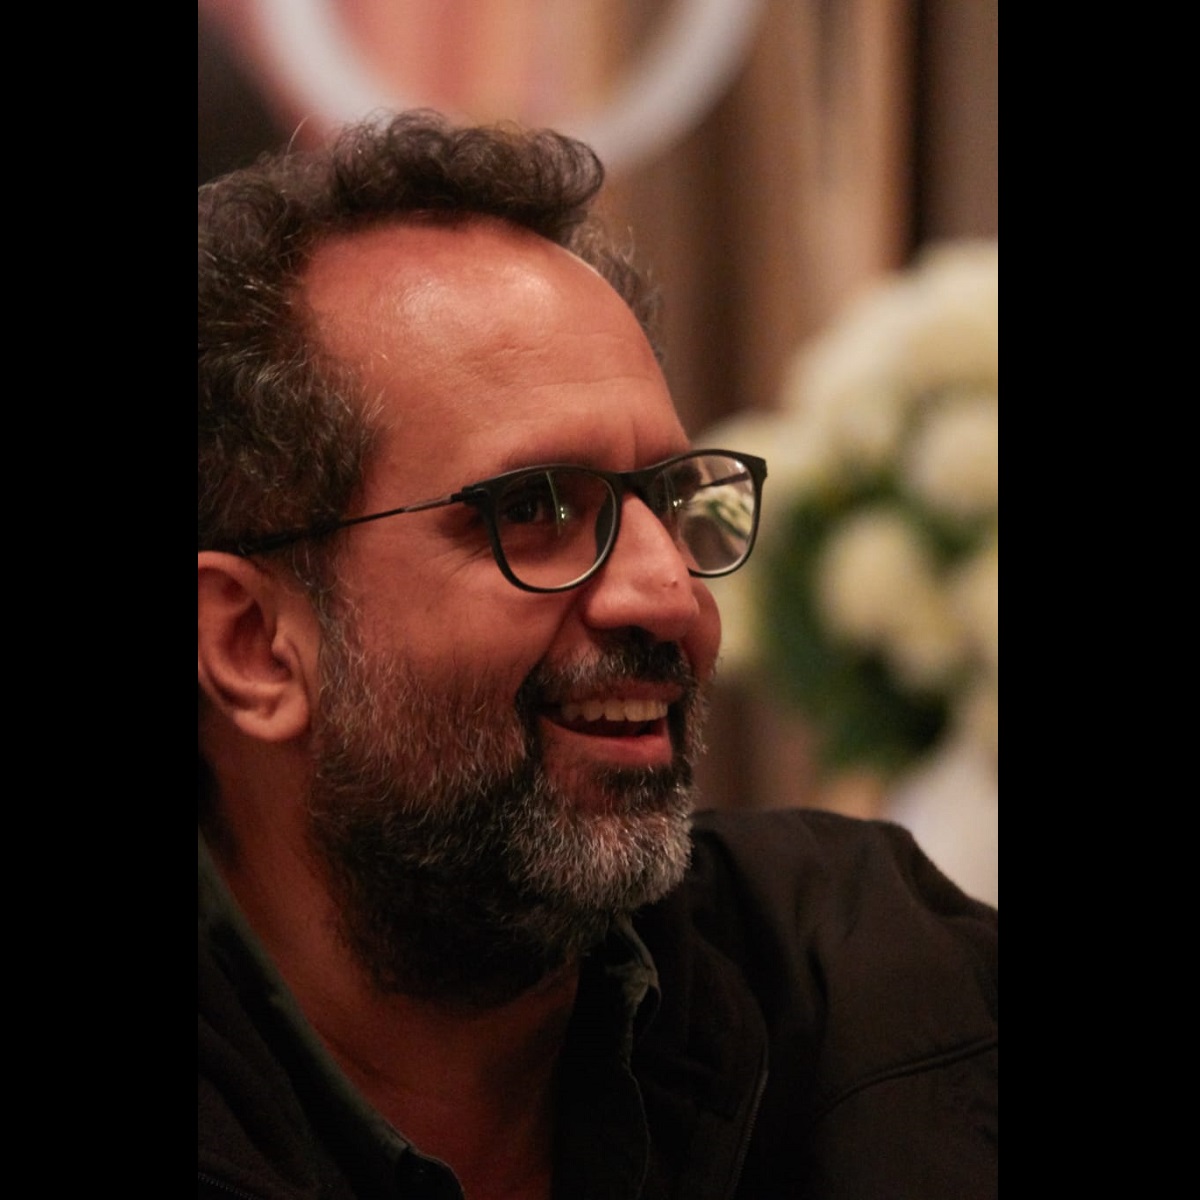 EXCLUSIVE: Aanand L Rai on Good Luck Jerry, Action Hero & Gorkha: ‘We are bankrolling original subjects’